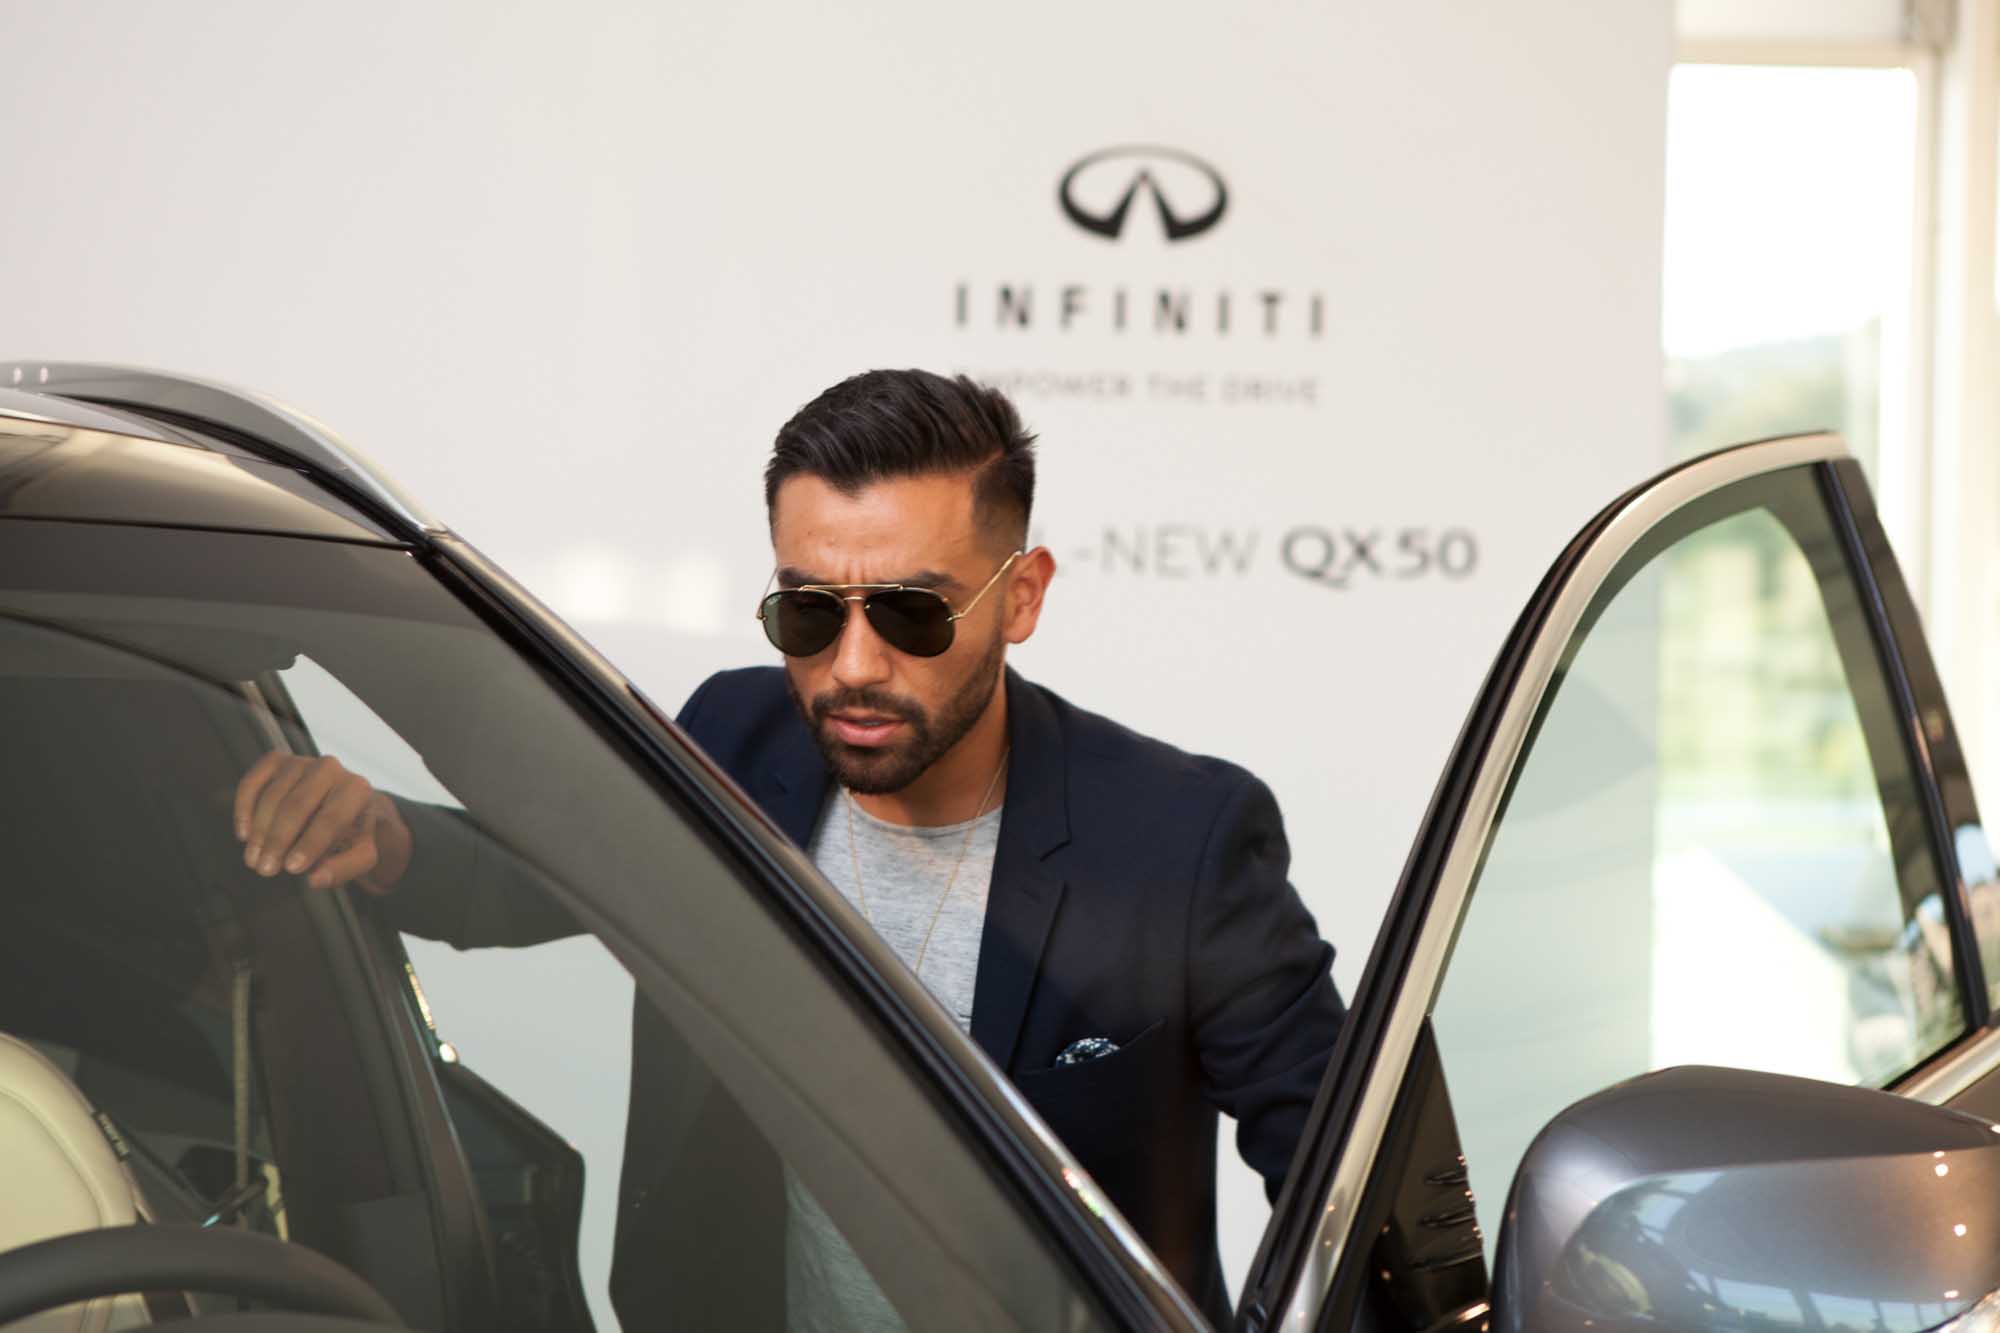 J Fig - @rule_of_thumbs in front of Infiniti QX-50 |  Car Photography | Fashion Photography | Male Model